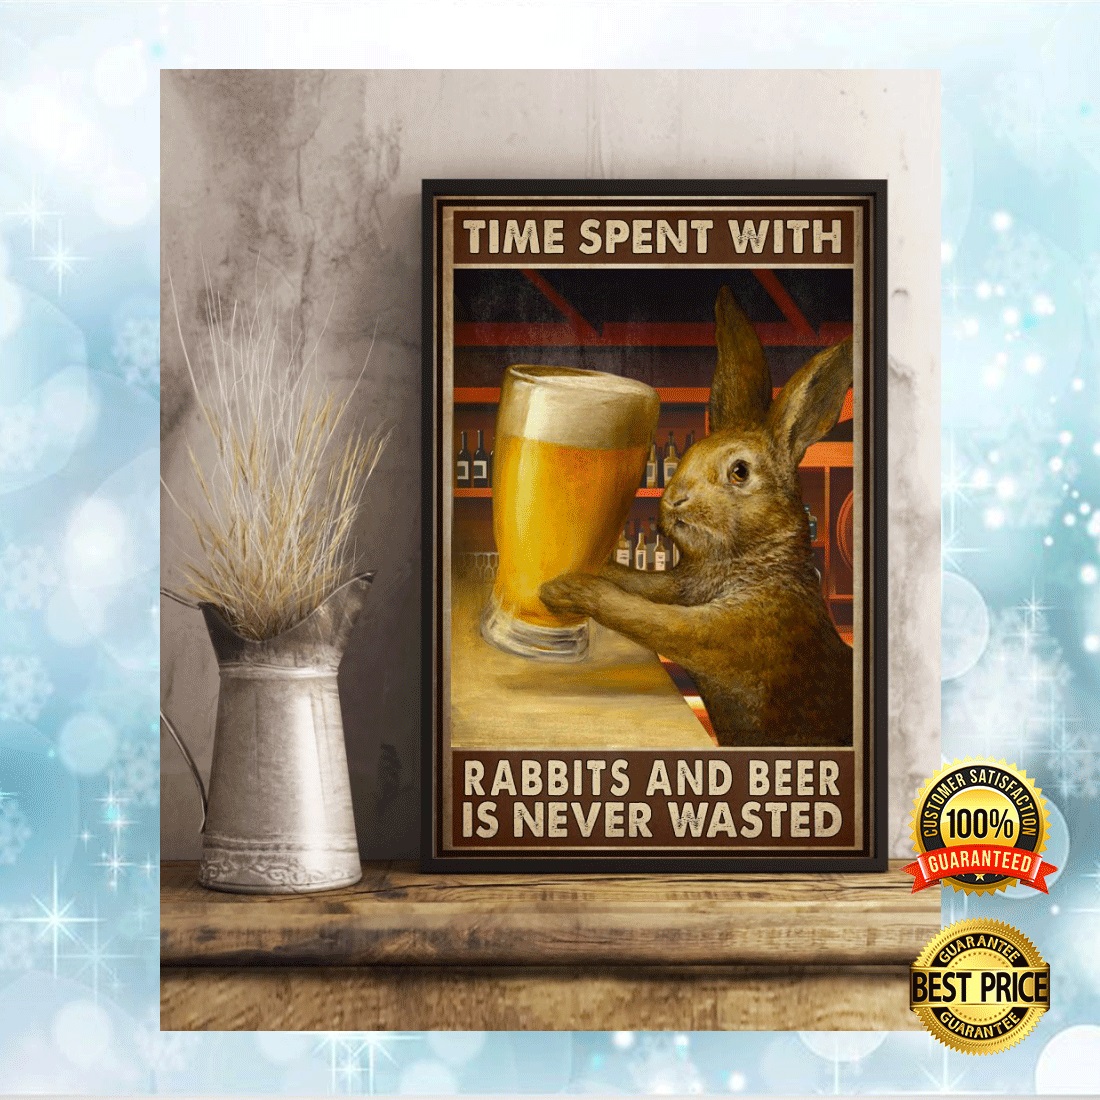 Time spent with rabbits and beer is never wasted poster 2